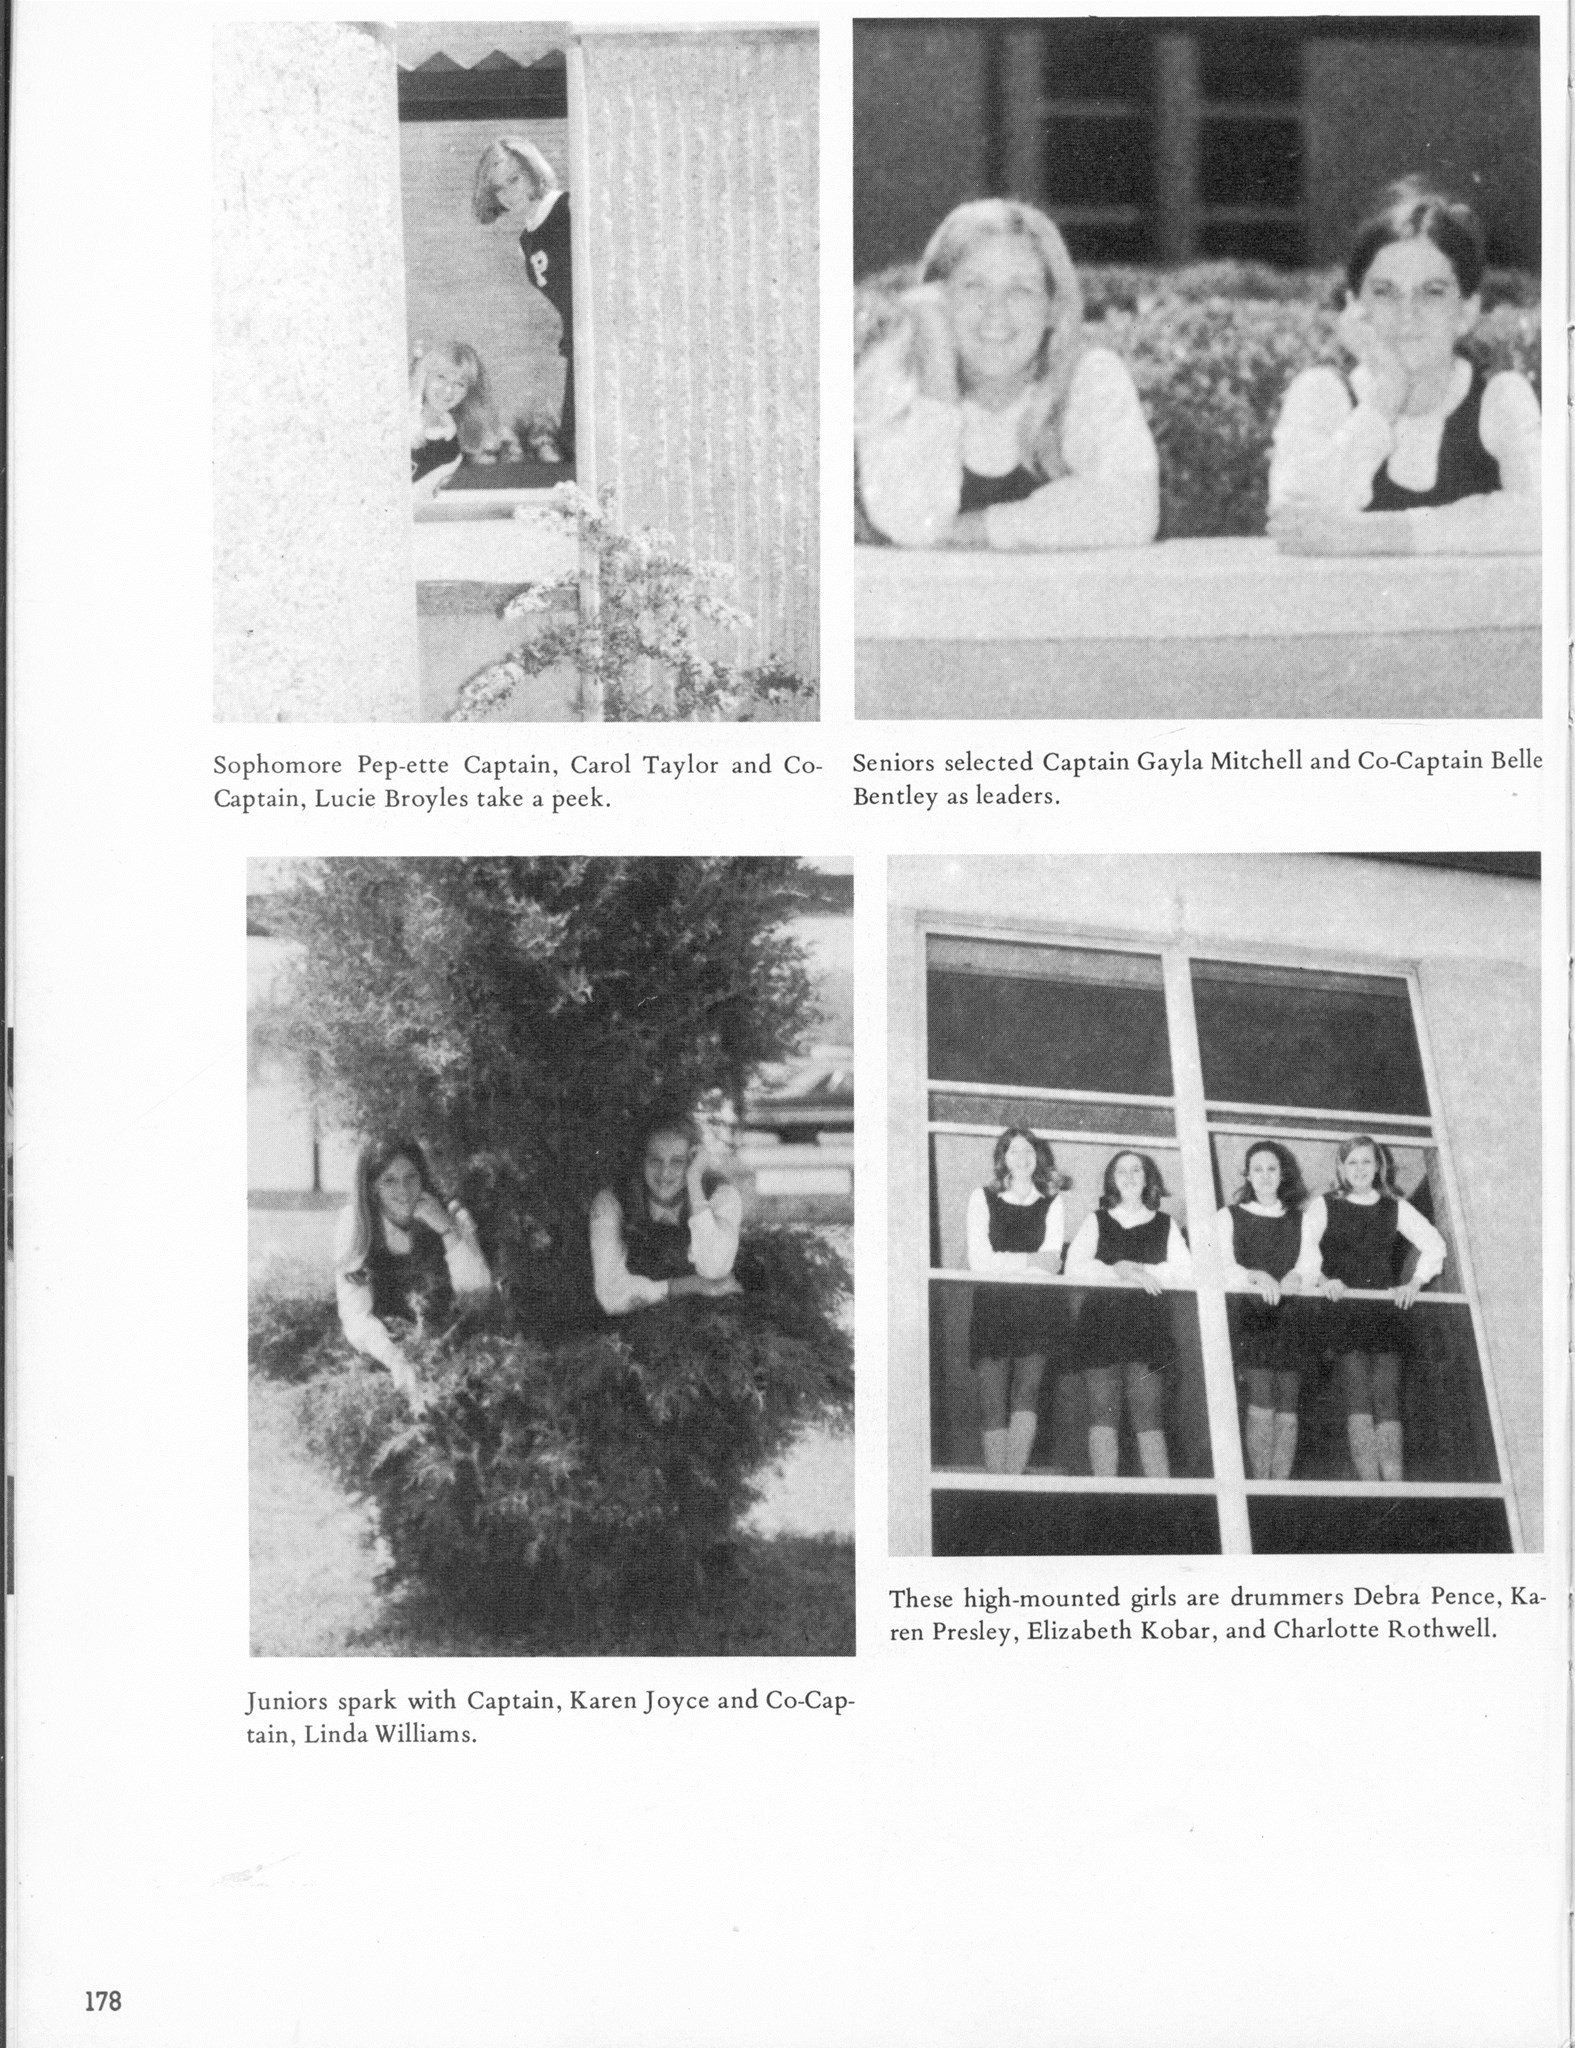 ../../../Images/Large/1970/Arclight-1970-pg0178.jpg